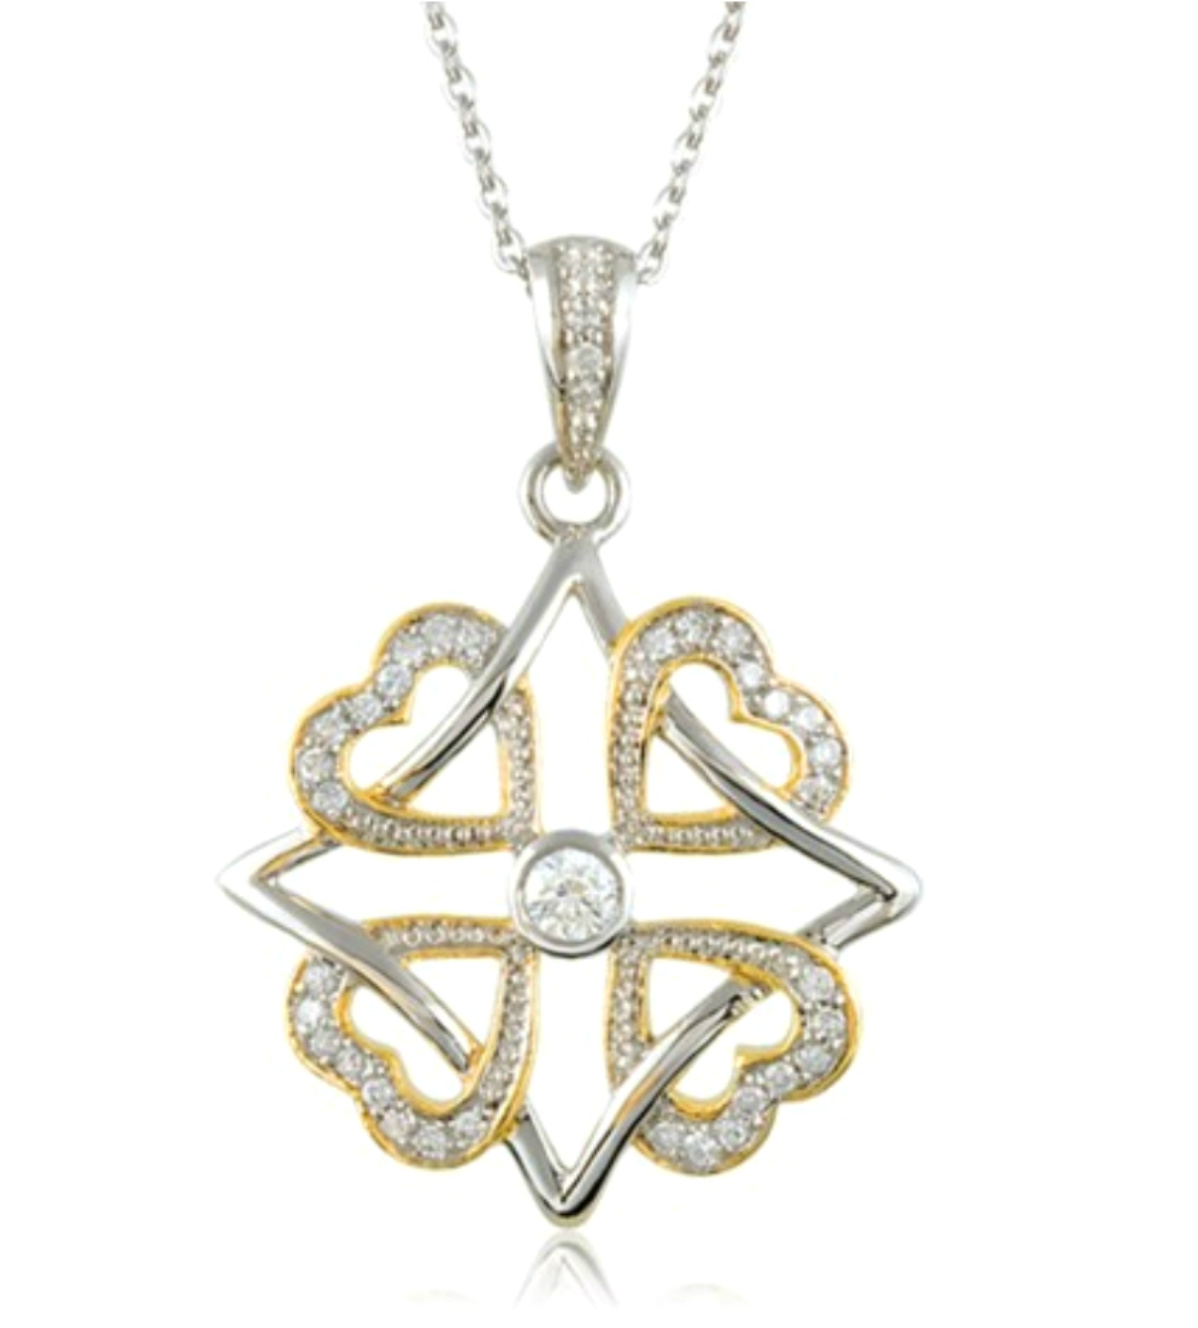 Pave CZ Hearts 'Faith, Family, Friends and Love' 14k Yellow Gold Plate and Rhodium Plate Sterling Silver Pendant Necklace, 18".